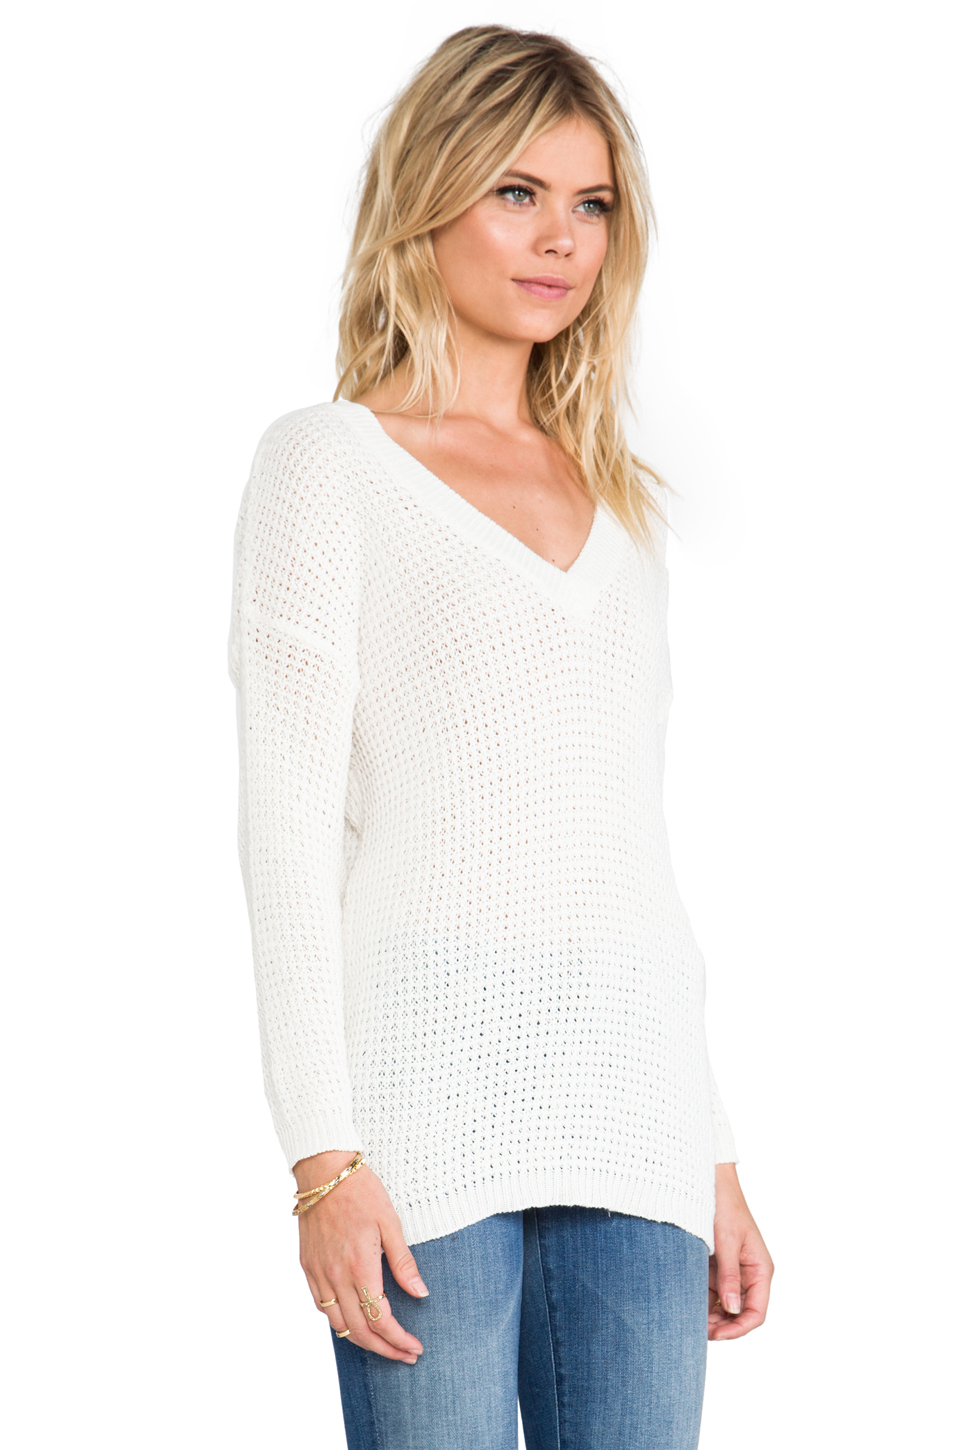 Anine Bing Knitted Sweater in White - Lyst